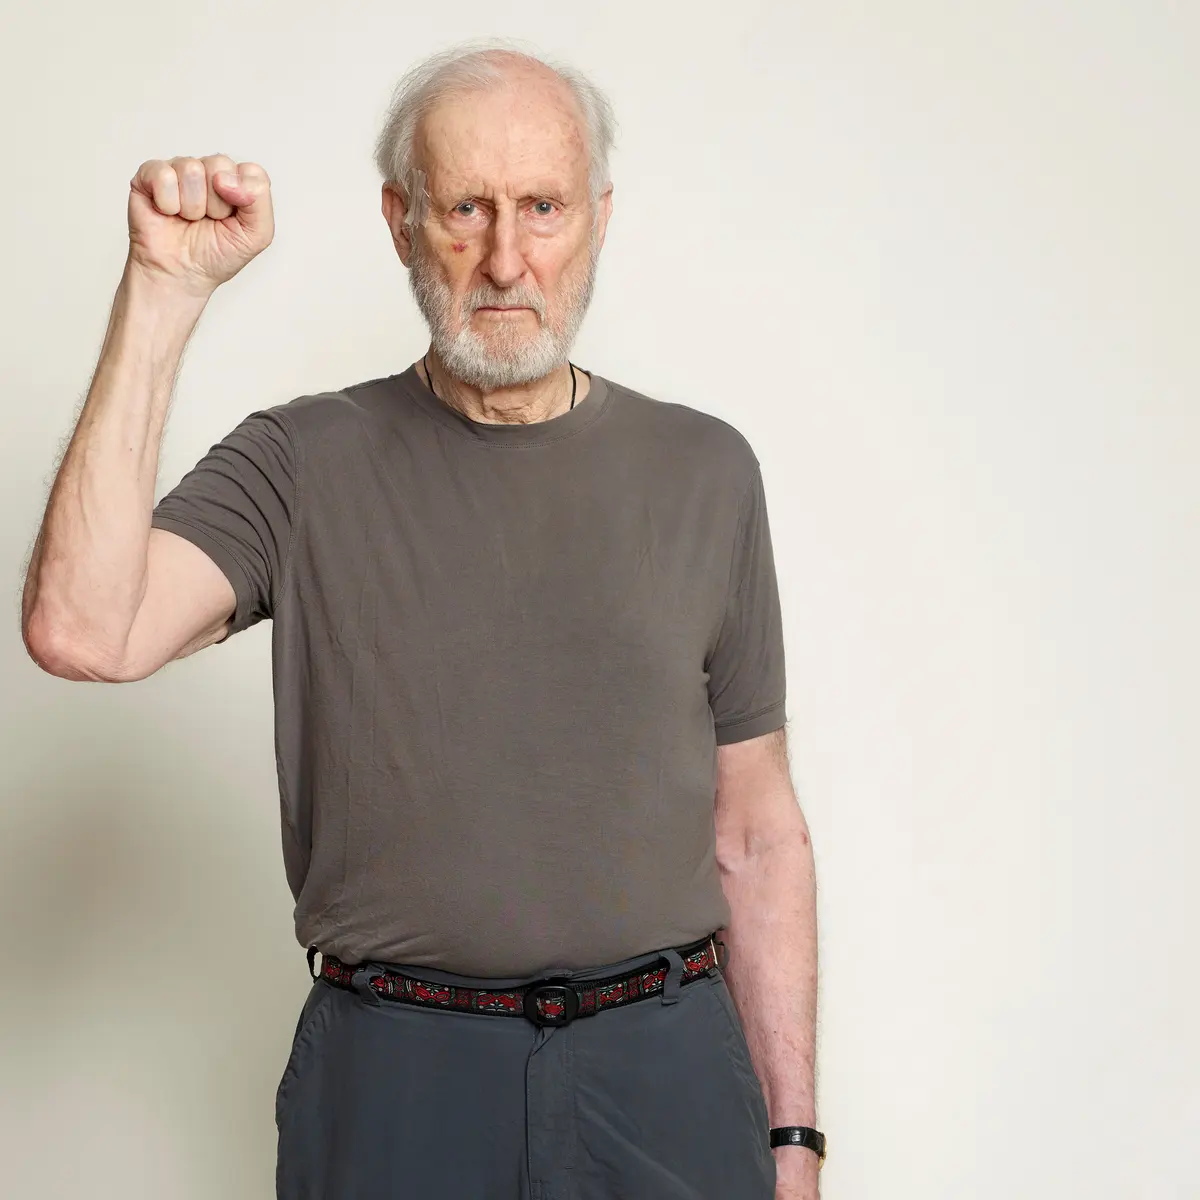 James Cromwell faces multiple controversies